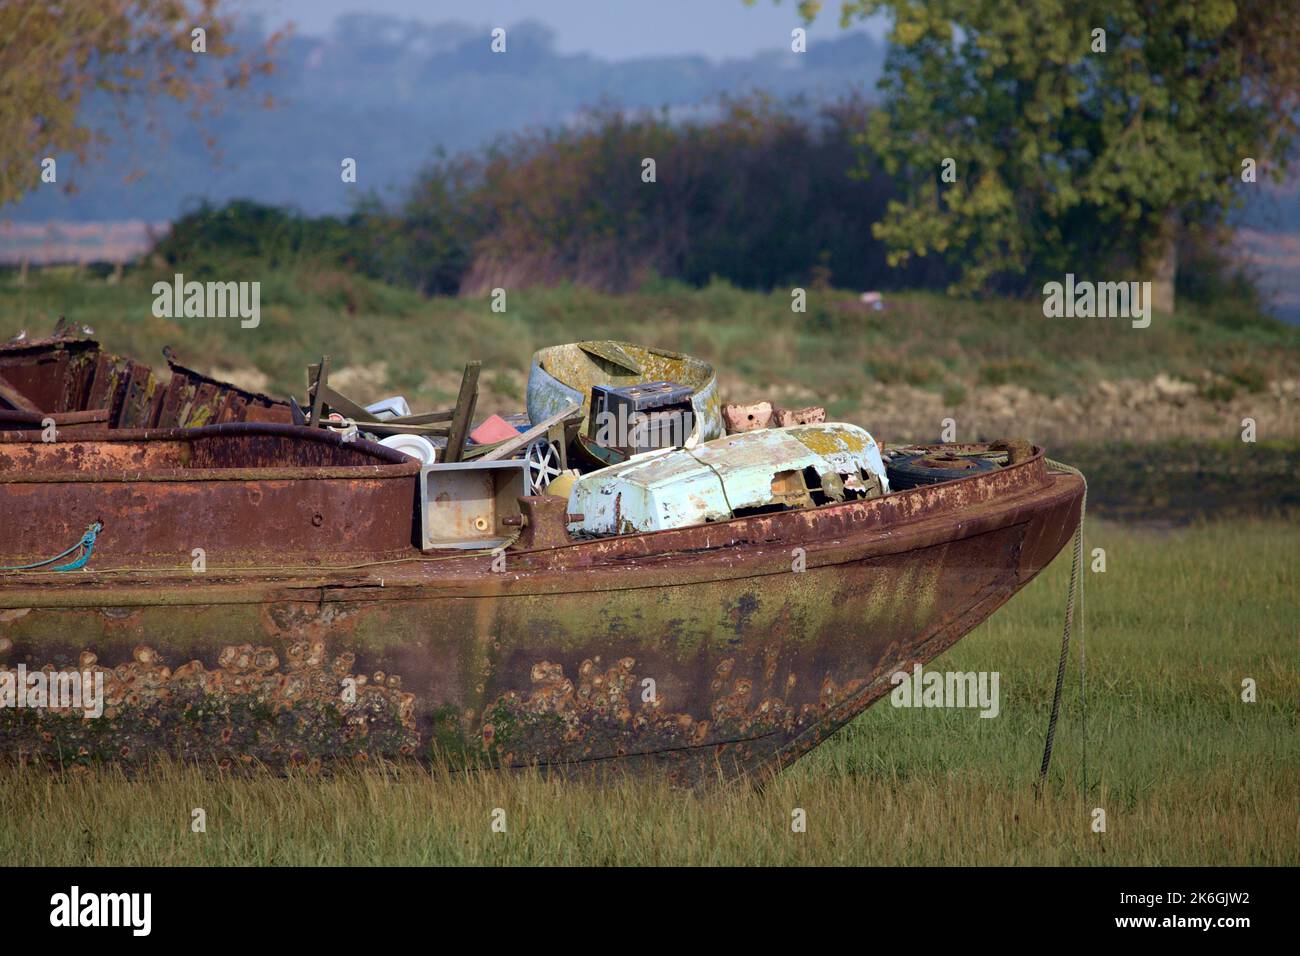 Rusting abandoned old boat wrecks at riverside park on the mud flats. Taken on 22-9-22. Stock Photo